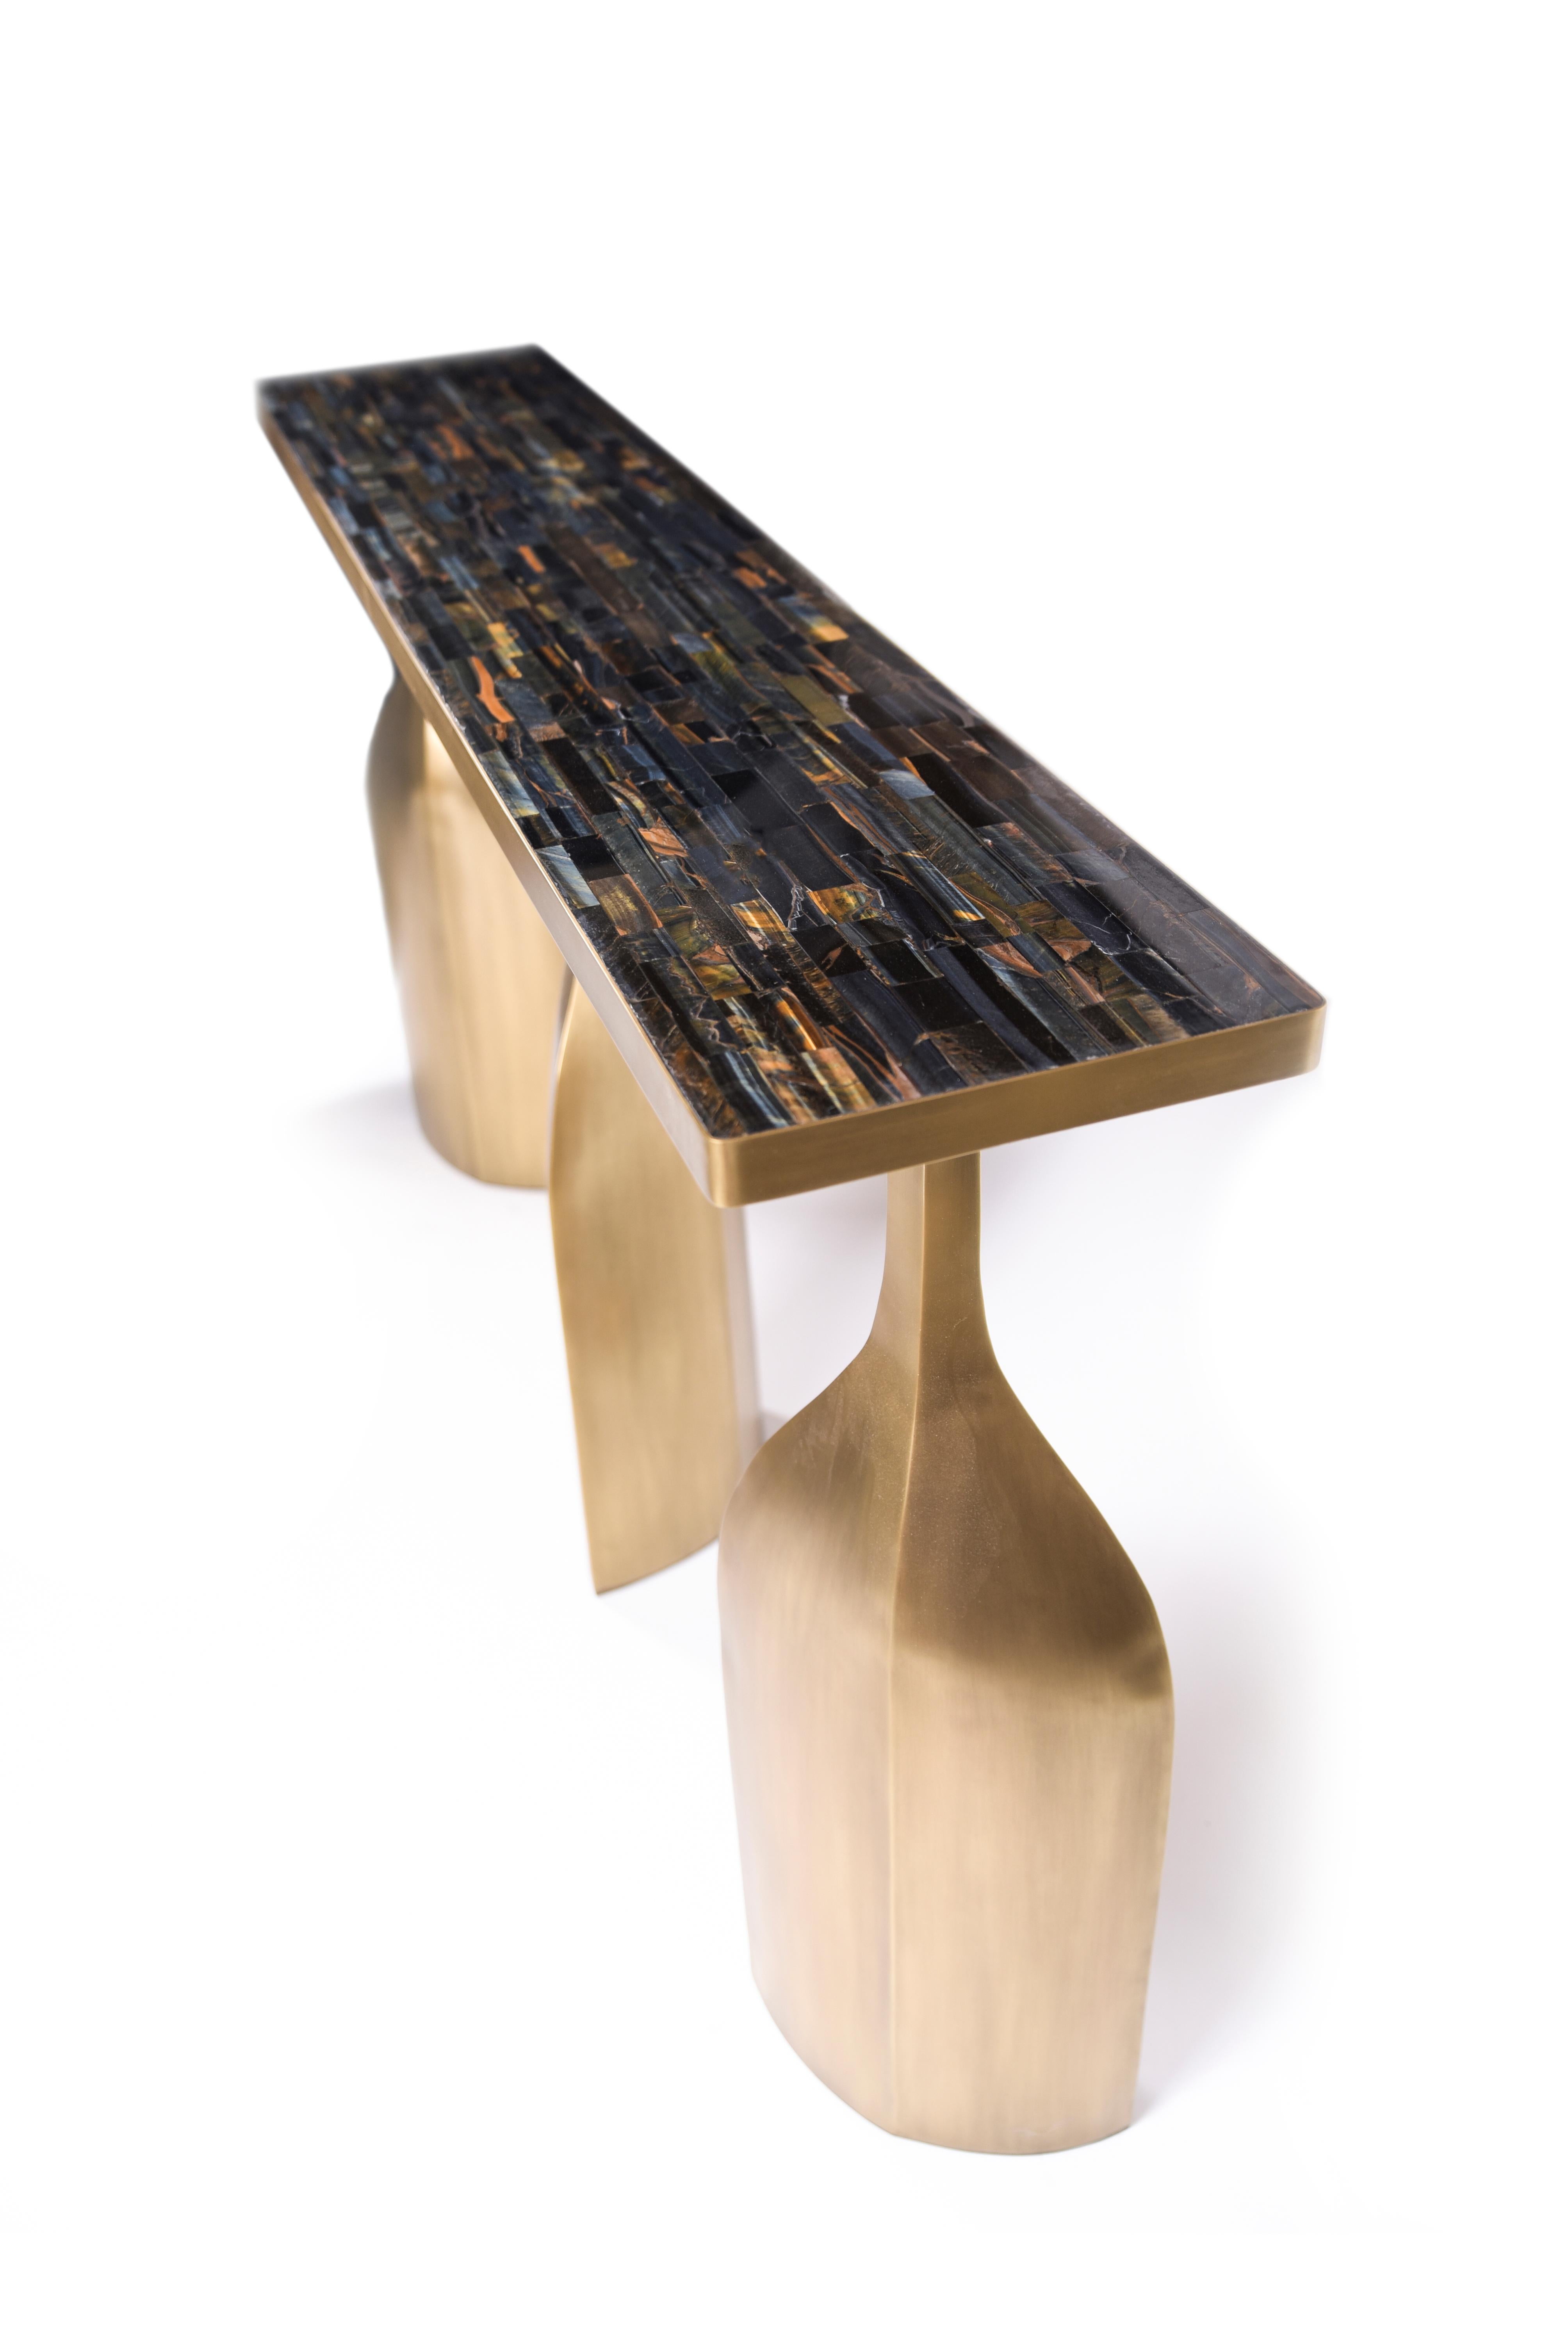 The Trinity console is bold and exquisite in design. The top is inlaid with the dreamy semi-precious stone: tiger eye blue. The stone features incredible natural details with its mixture of blue, black and gold hues. The top sits on three stunning